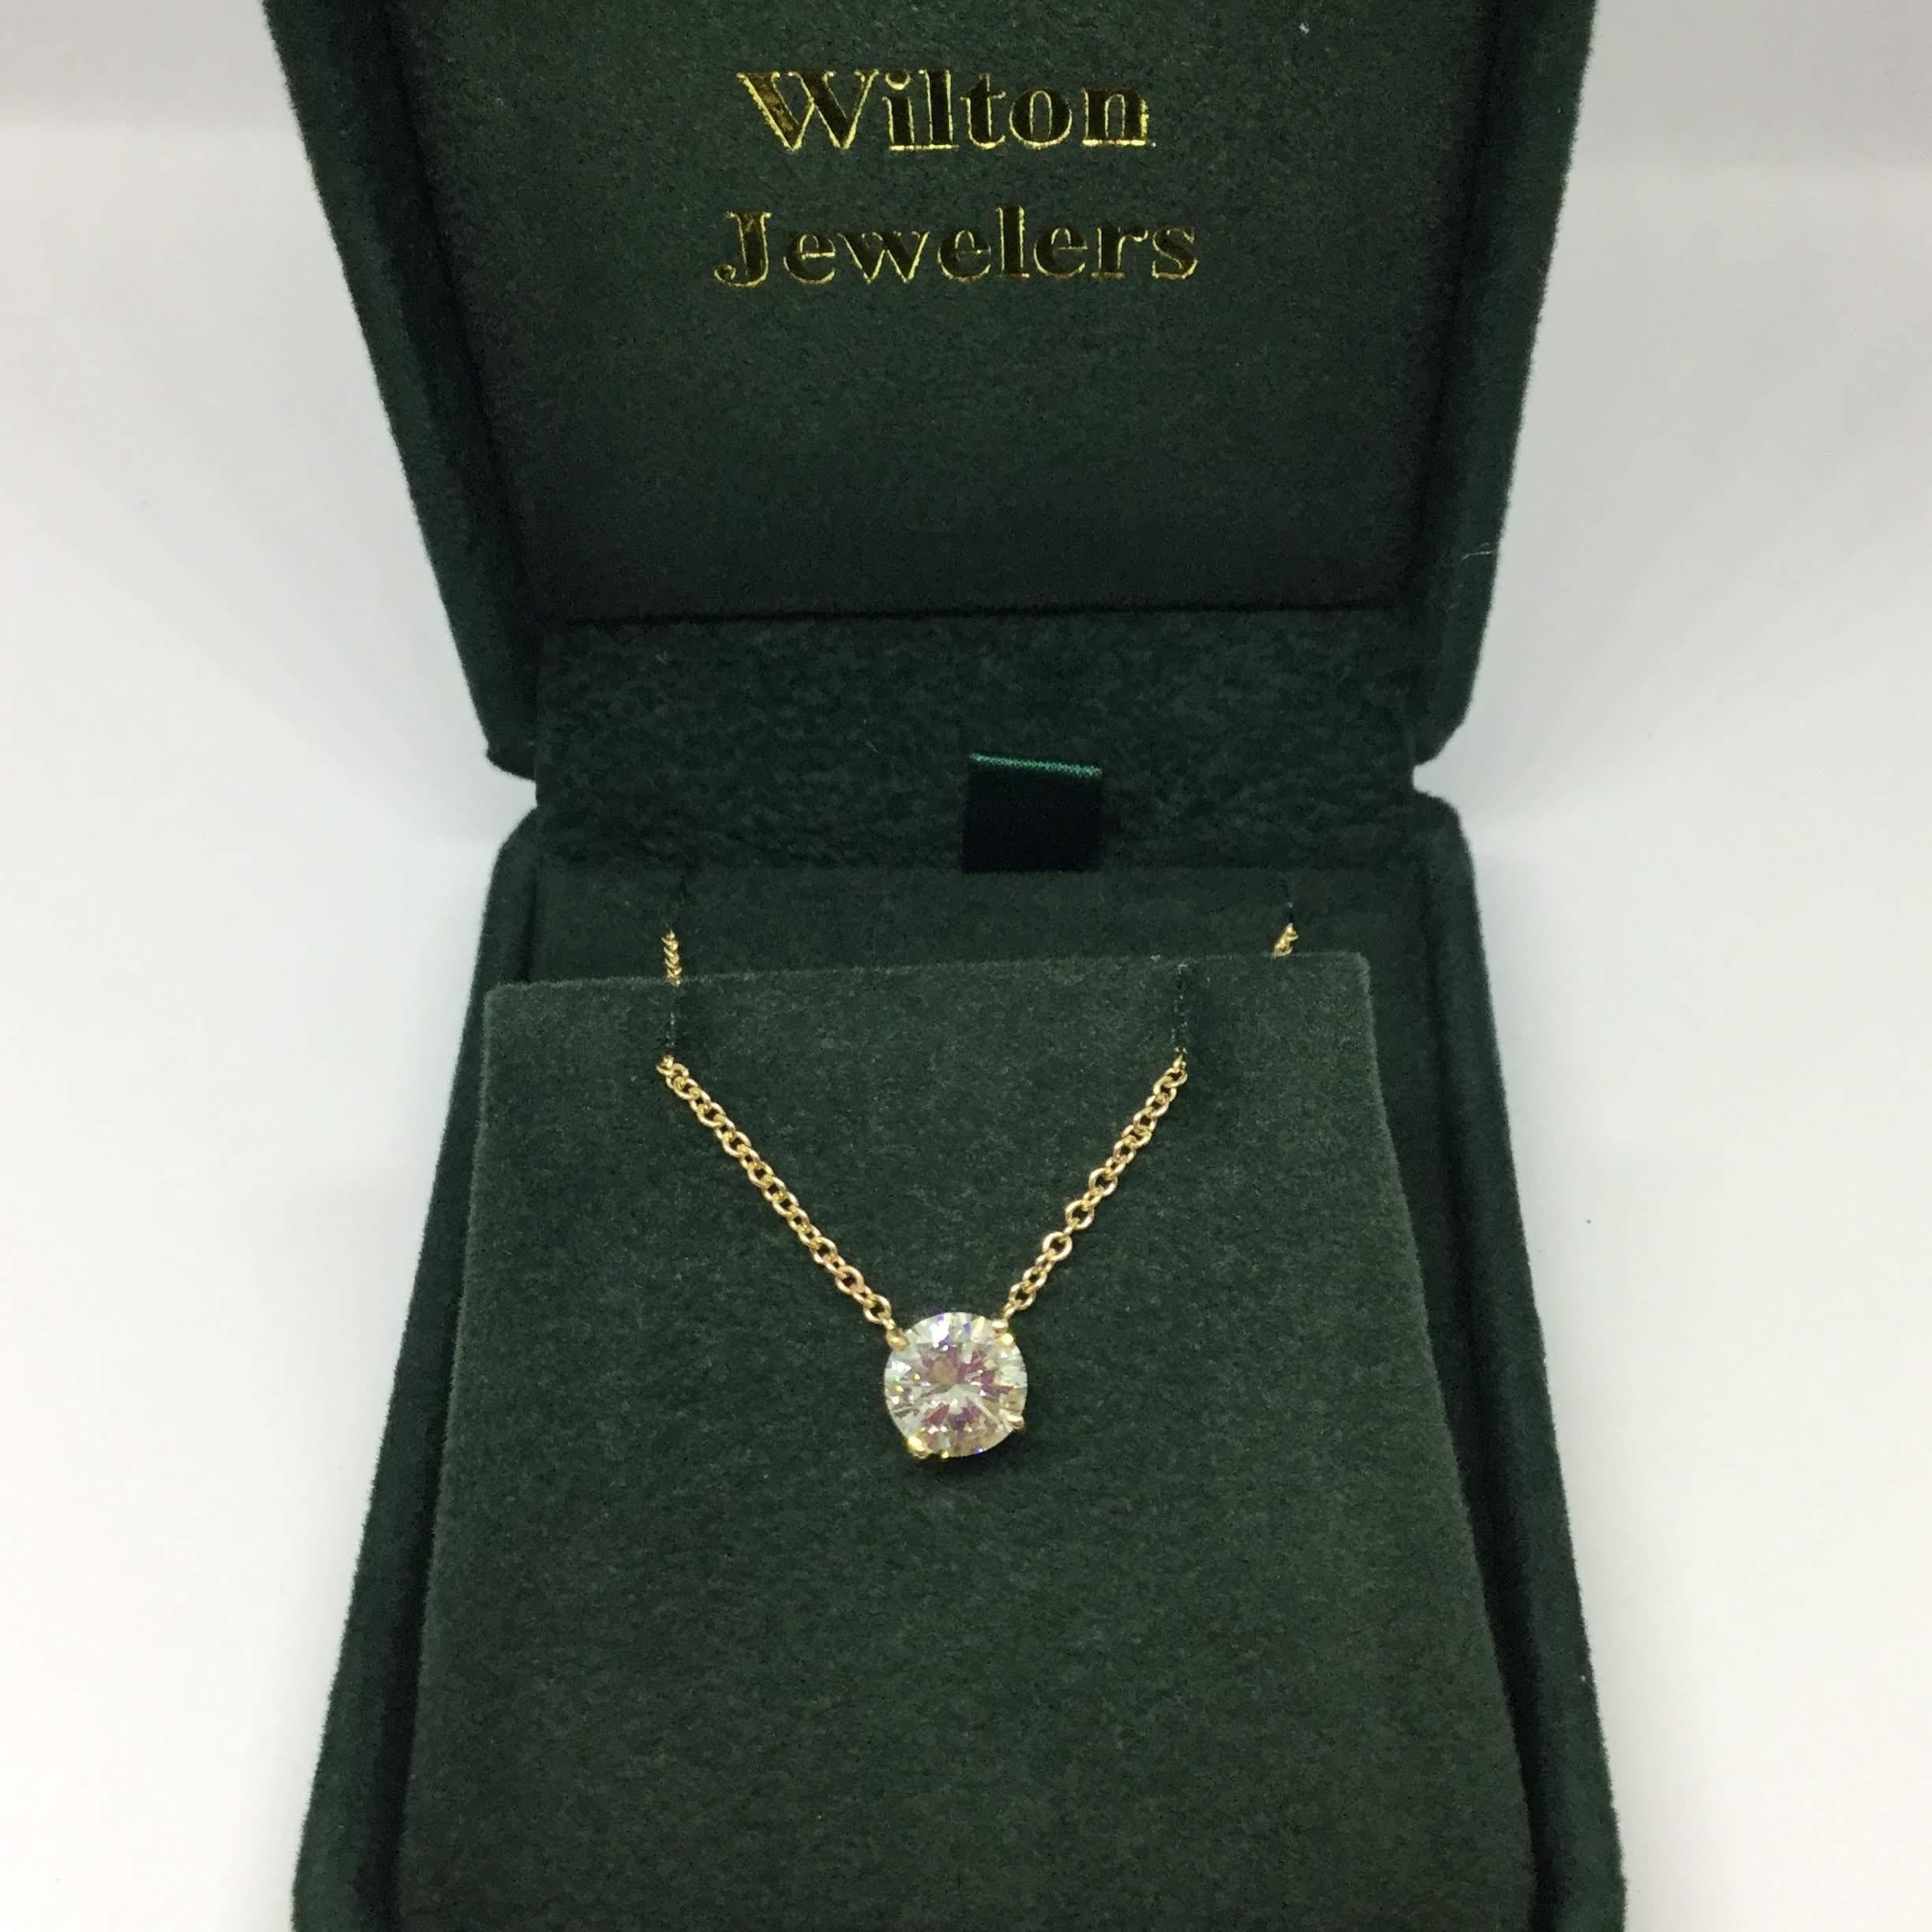 14k Yellow gold diamond pendant necklace. The pendant contains one round brilliant cut Diamond. The diamond is GIA certified report number 1206238313. The diamond weighs 1.77 ctw, N/SI1. The diamond is set in a four prong wire basket. The chain is